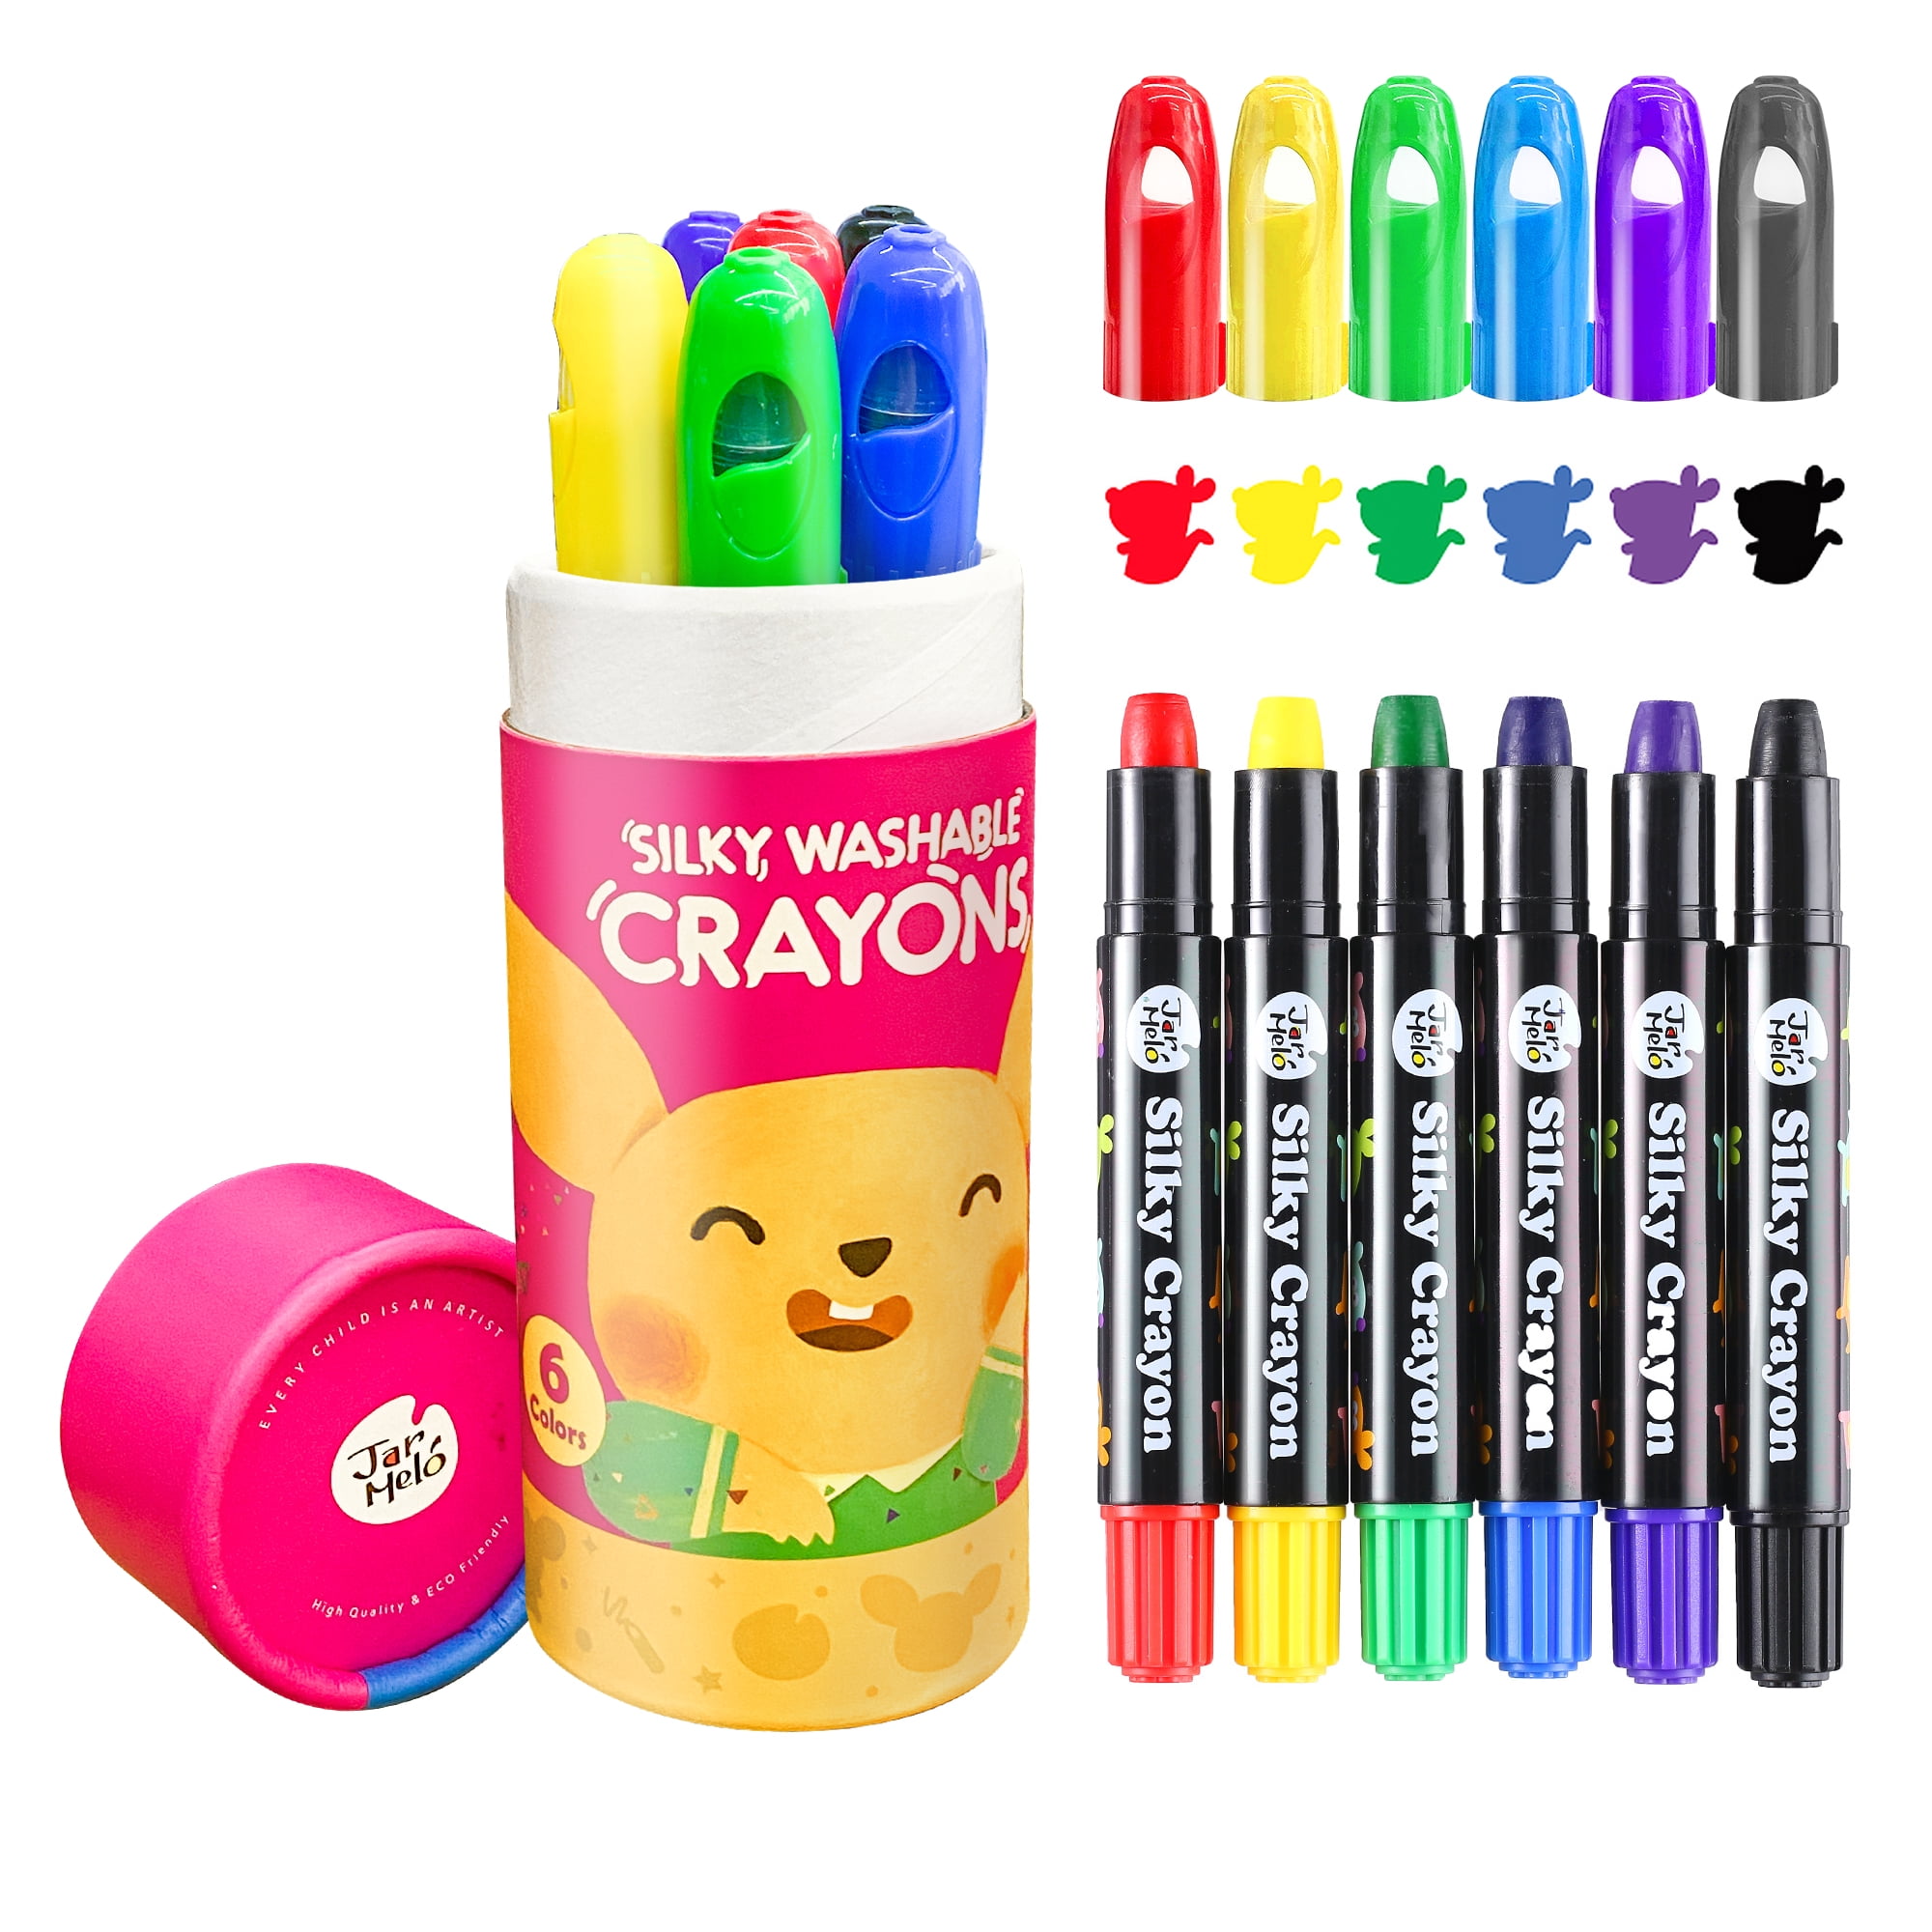  Four Candies Crayons 12 Count, Non Toxic Washable Toddler  Crayons, Water-Drop Shape Jumbo Crayons with Easy-Grip Perfect for Toddlers  Hands, Crayons for Kids Art & School Supplies : Toys & Games